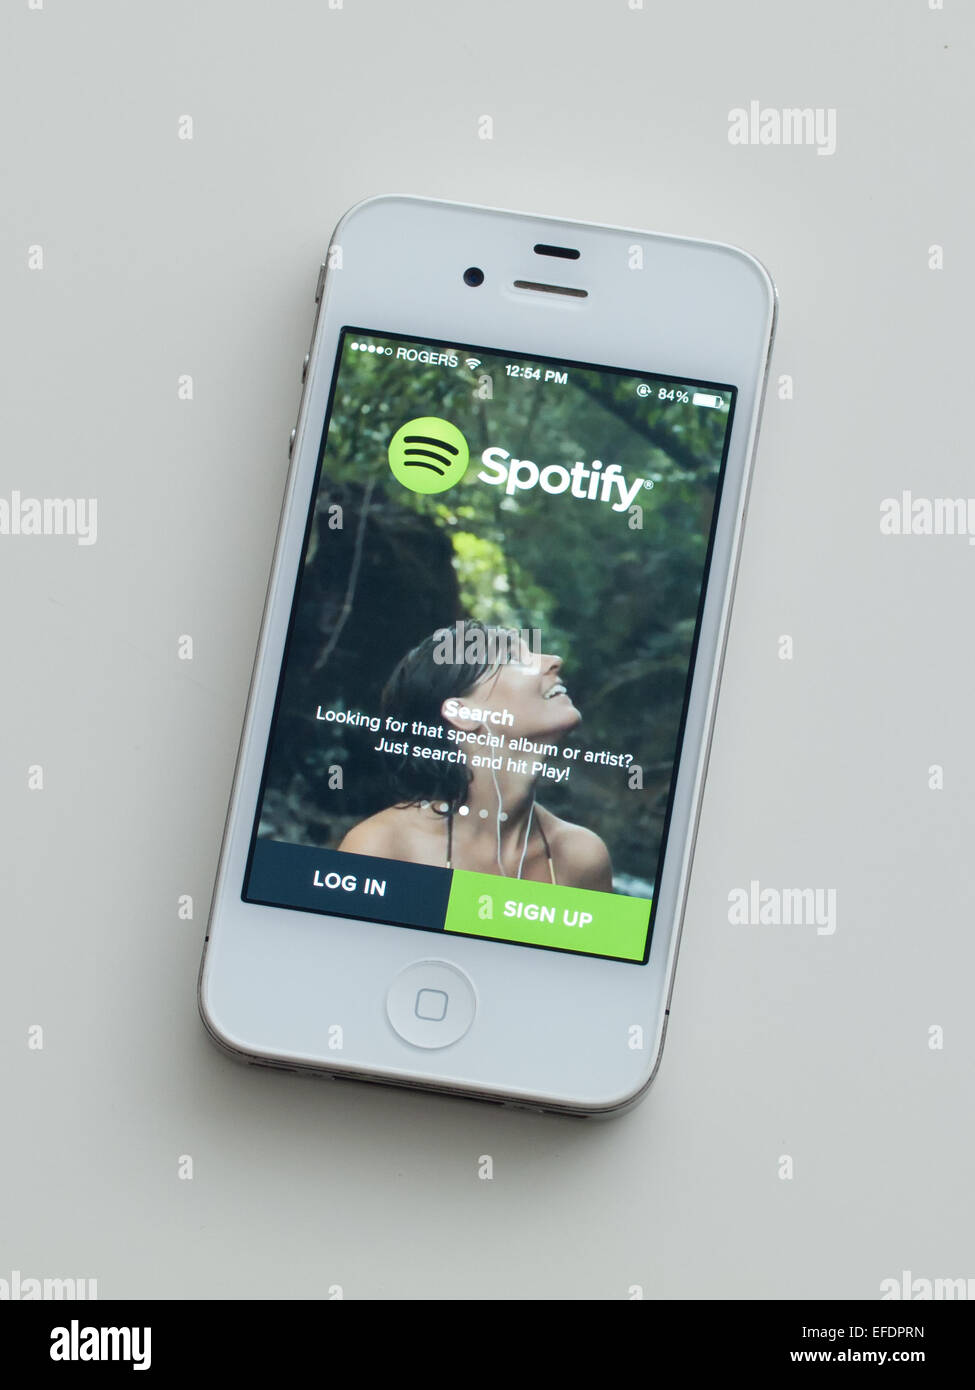 A view of the logo and homescreen of the Spotify app on an Apple iPhone 4. Stock Photo